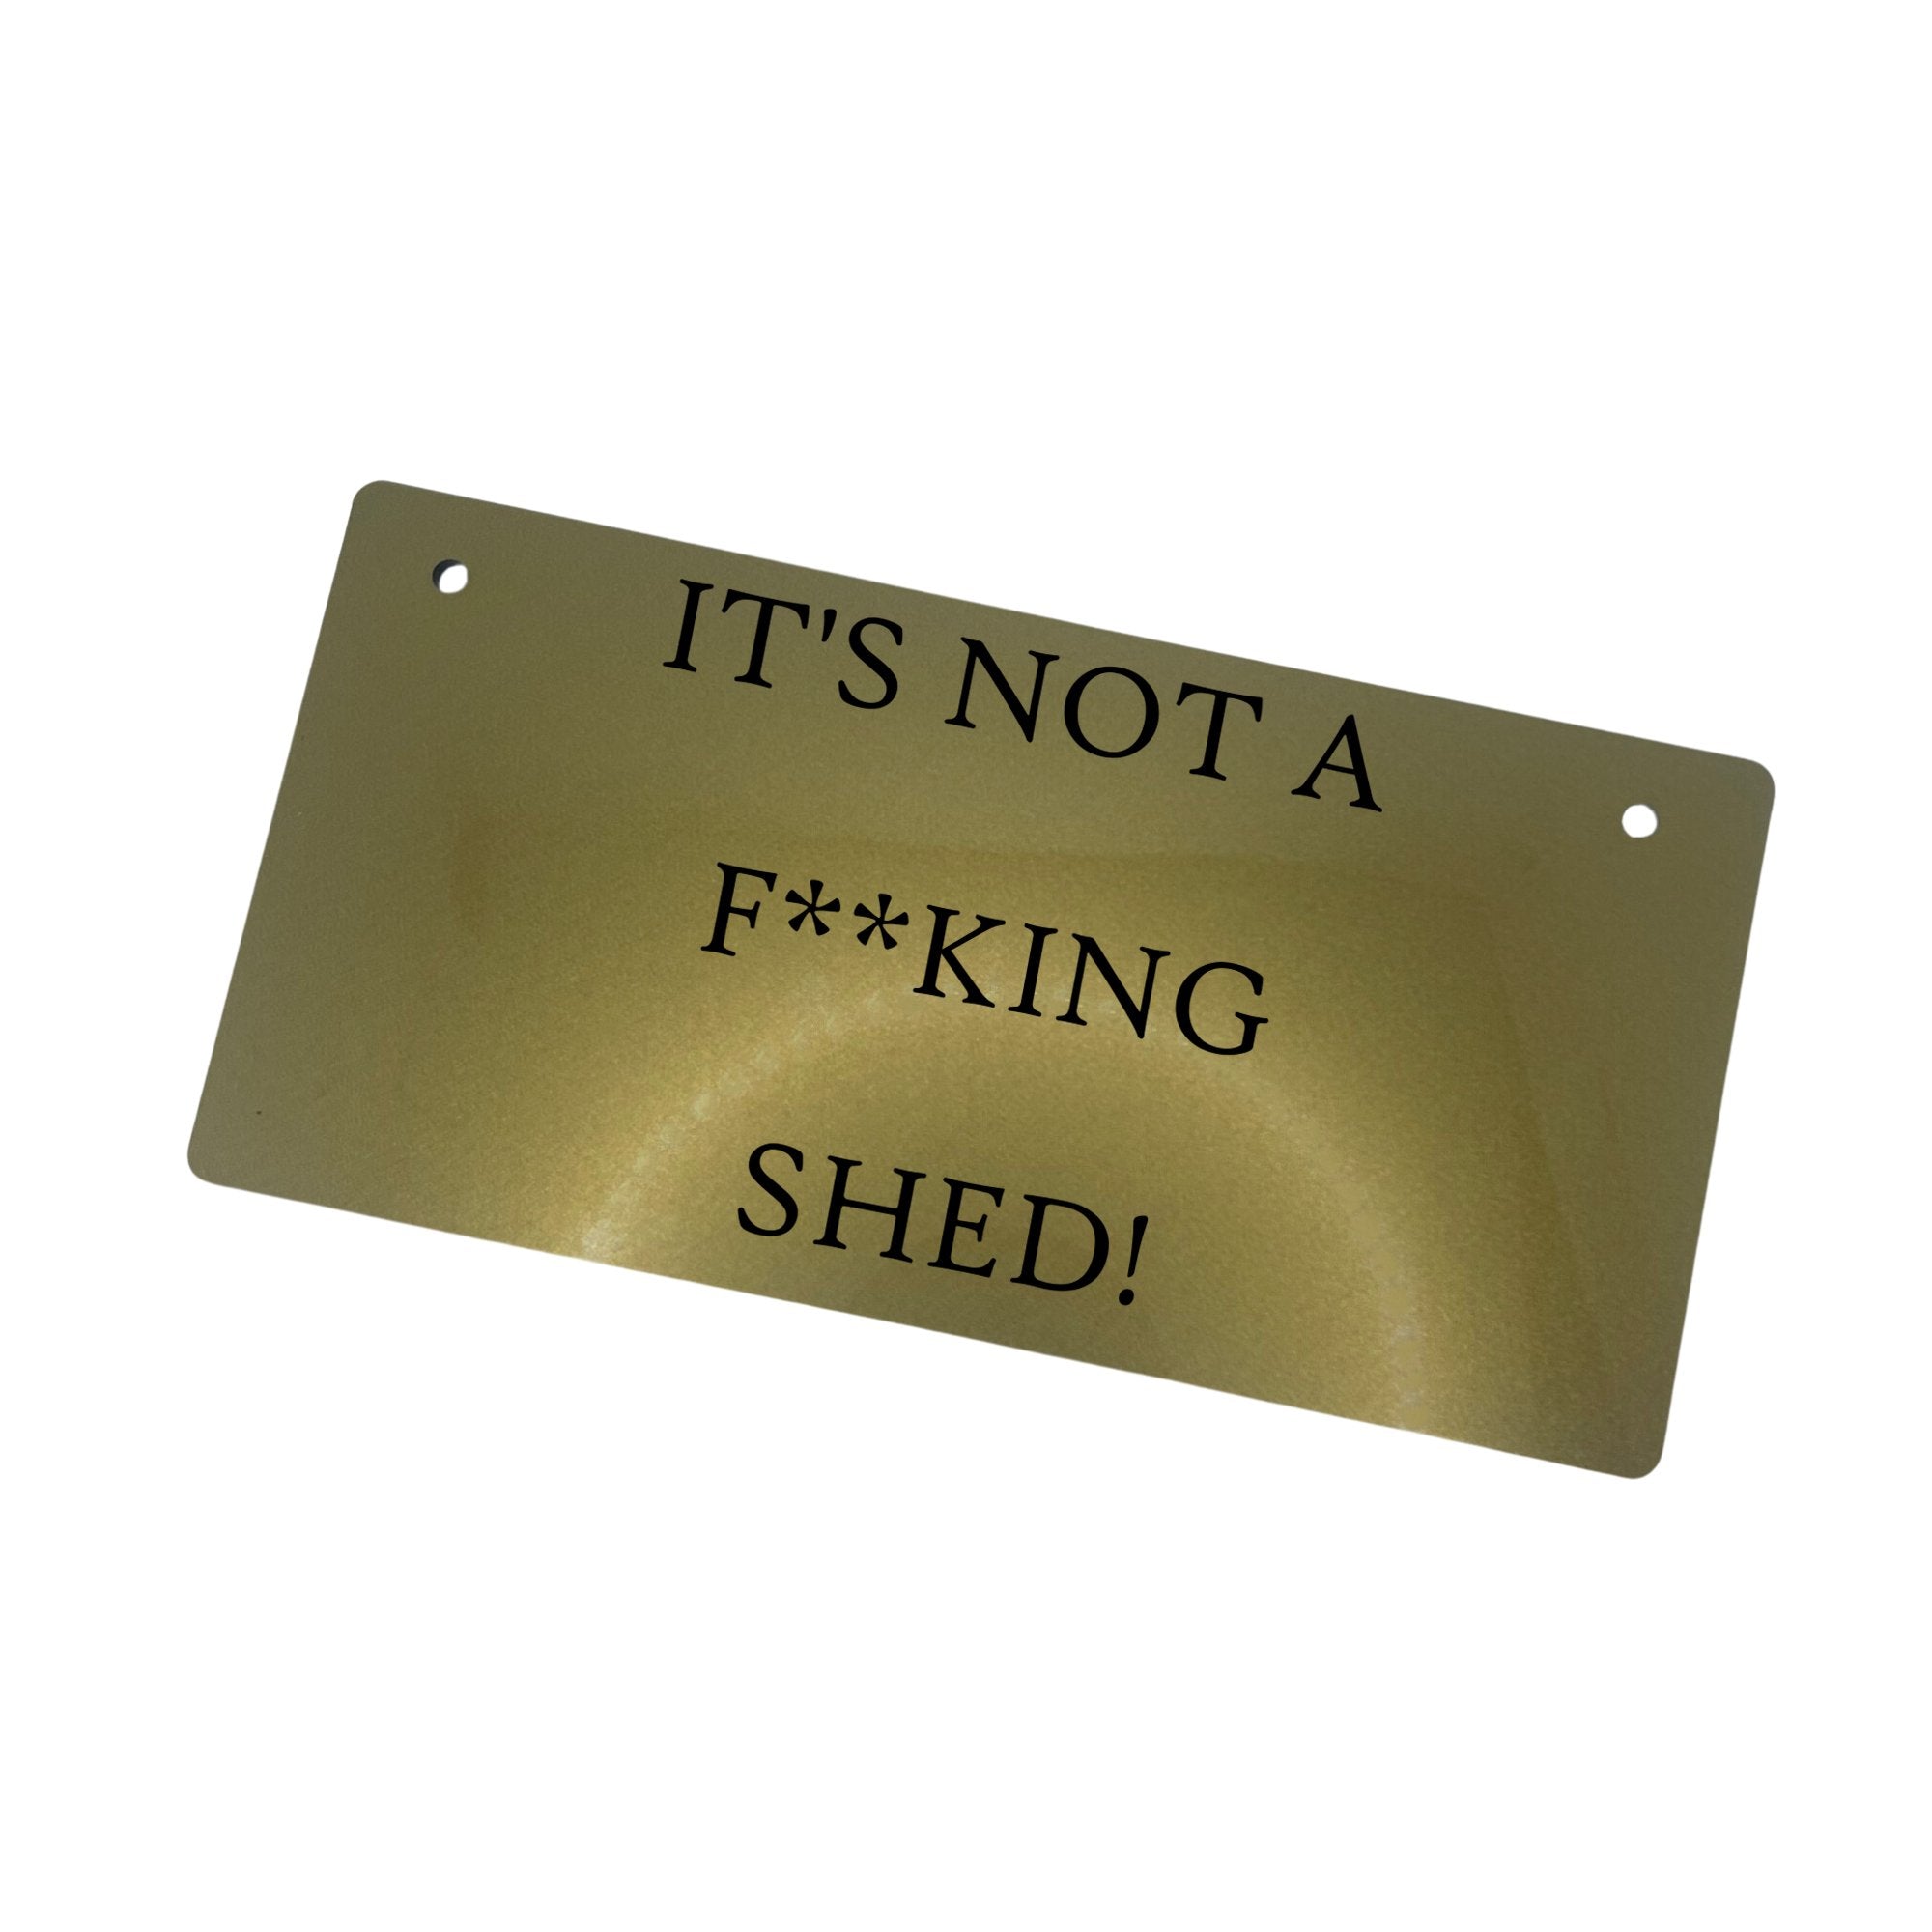 Alt Text: "Gold 'IT'S NOT A FKING SHED' Sign: Distinctive and Eye-Catching" Description: An angled view of the gold-colored acrylic sign displaying the engraved text "IT'S NOT A FKING SHED." The sign's design adds a distinctive touch to any space.